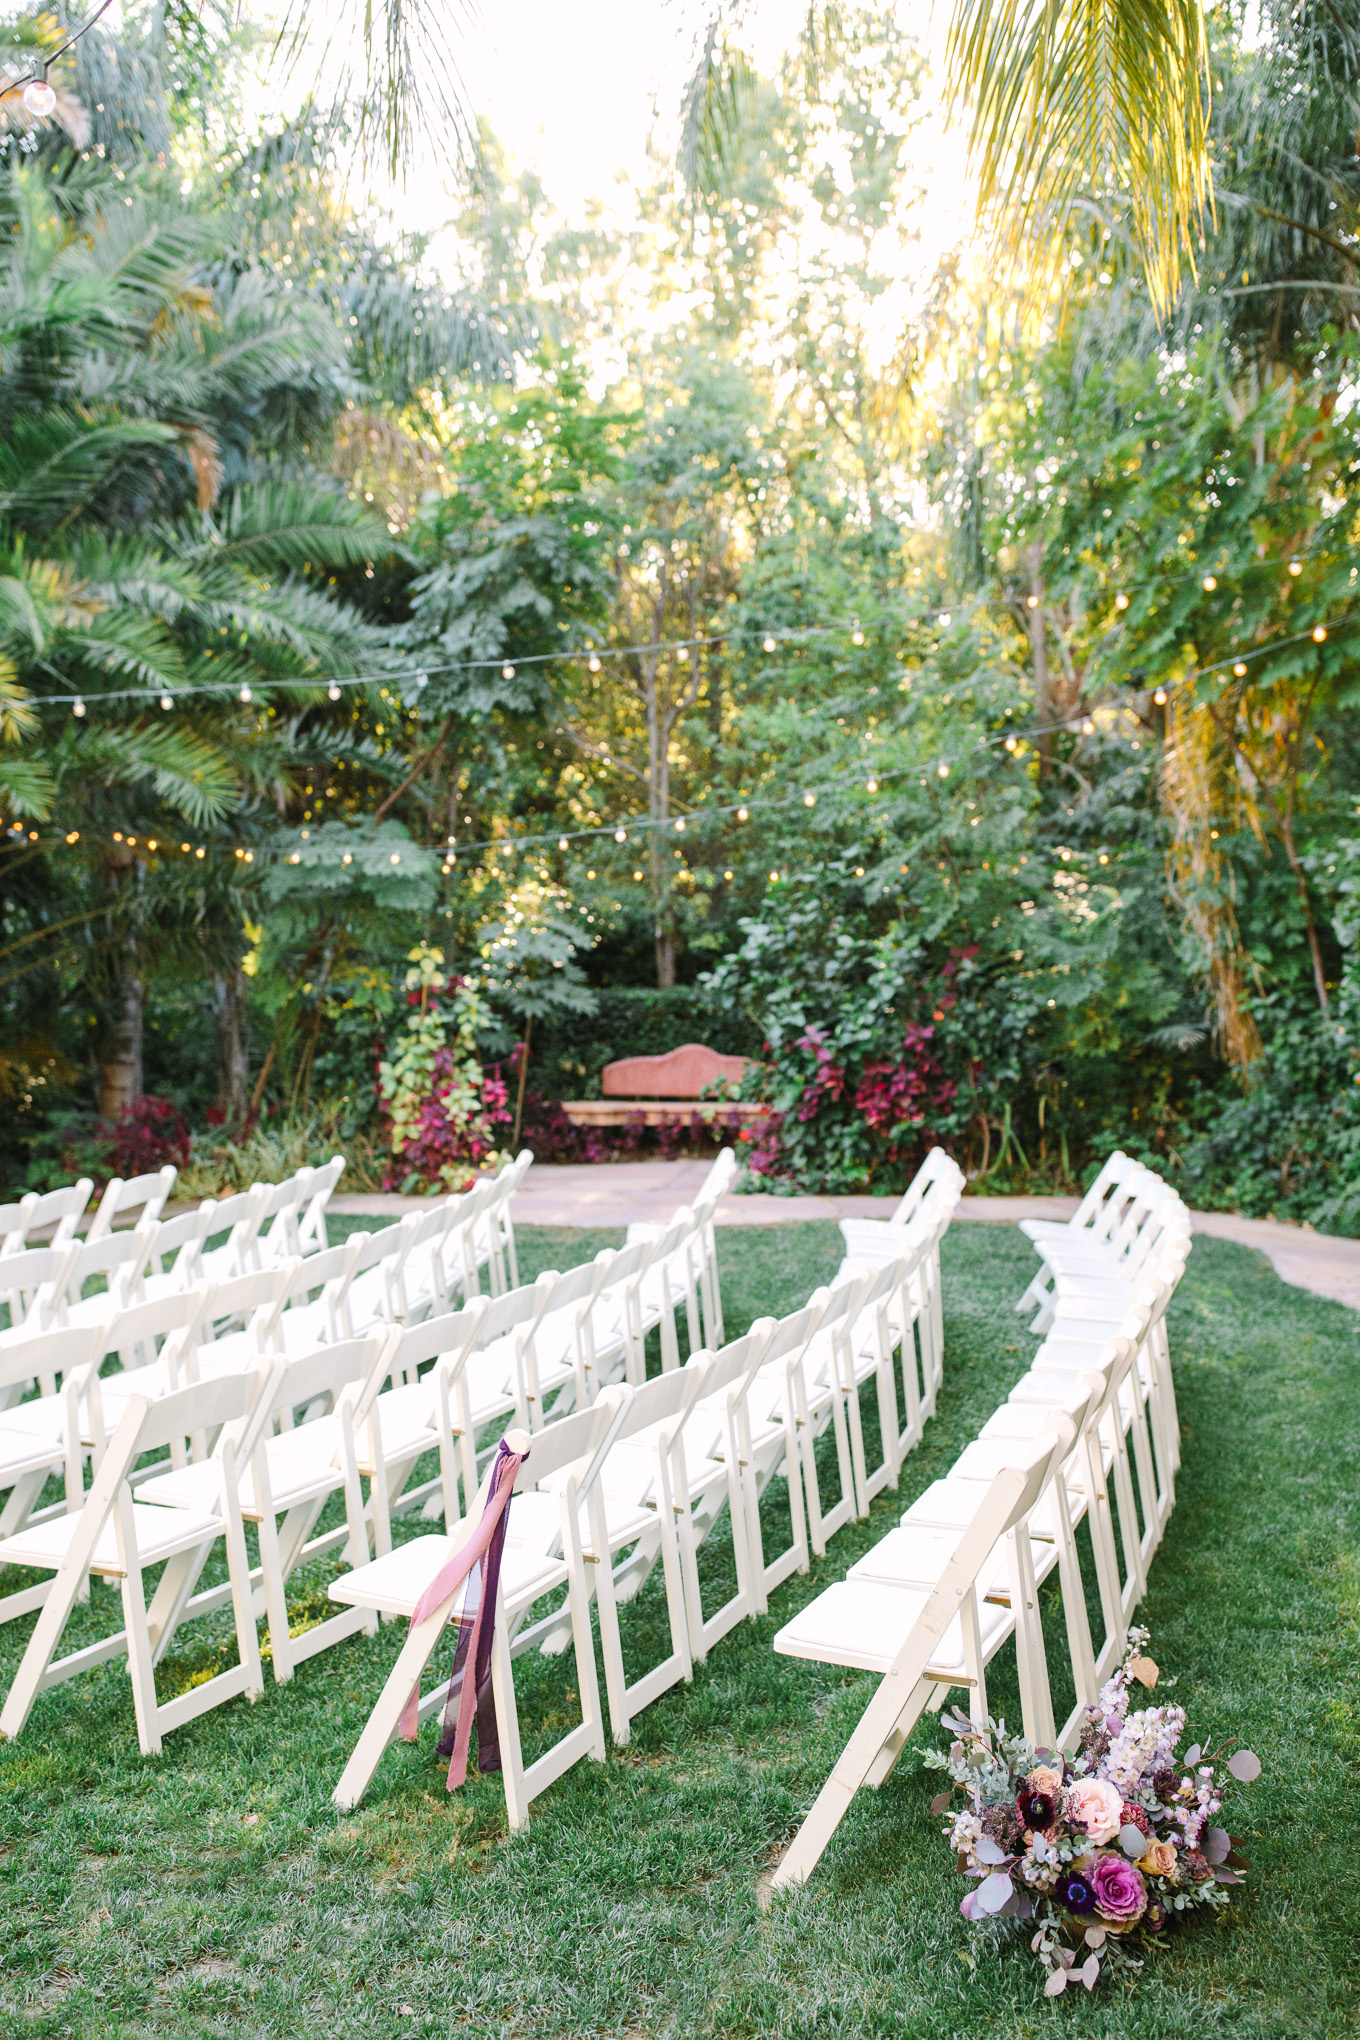 Eden Gardens Moorpark wedding ceremony | Best Southern California Garden Wedding Venues | Colorful and elevated wedding photography for fun-loving couples | #gardenvenue #weddingvenue #socalweddingvenue #bouquetideas #uniquebouquet   Source: Mary Costa Photography | Los Angeles 